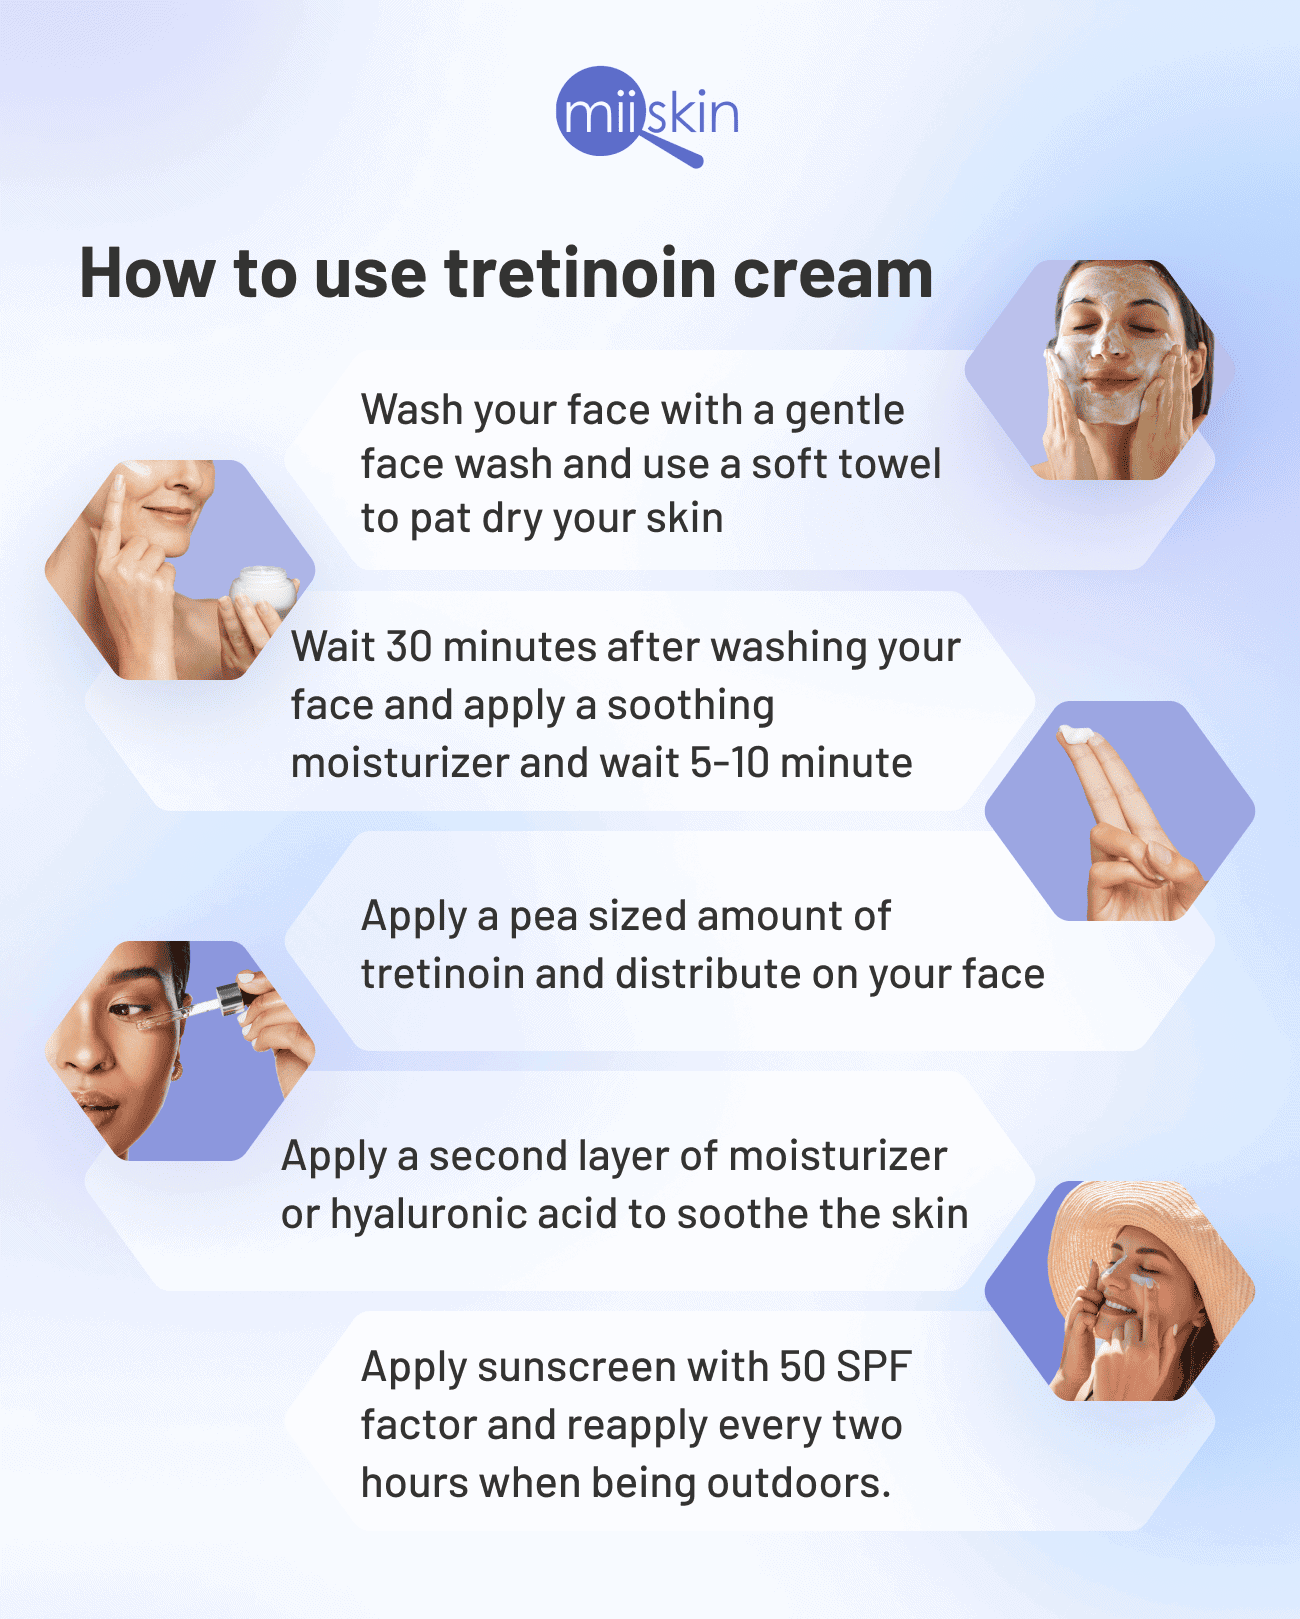 Best Way to Use Tretinoin for Acne